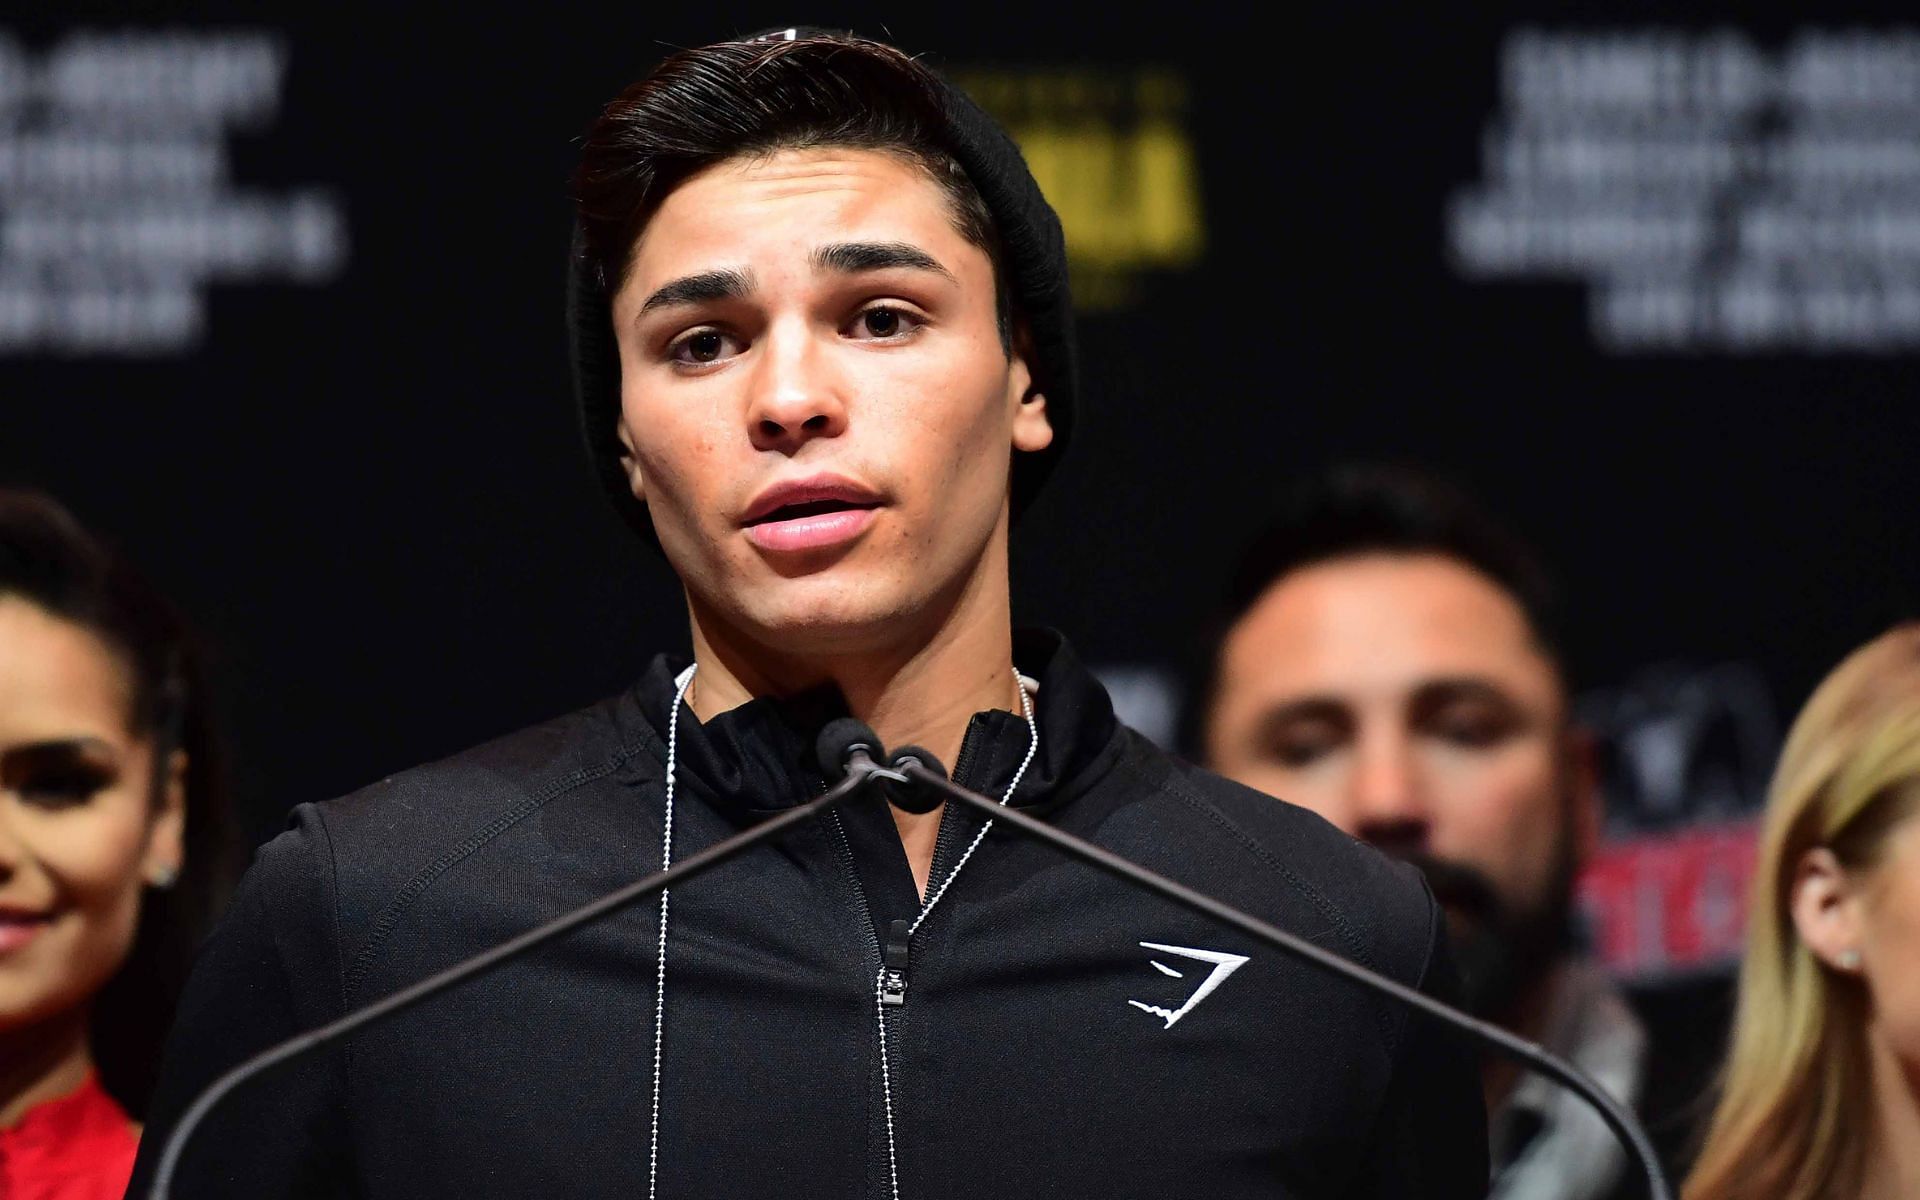 Ryan Garcia seemingly disapproves of the United States government